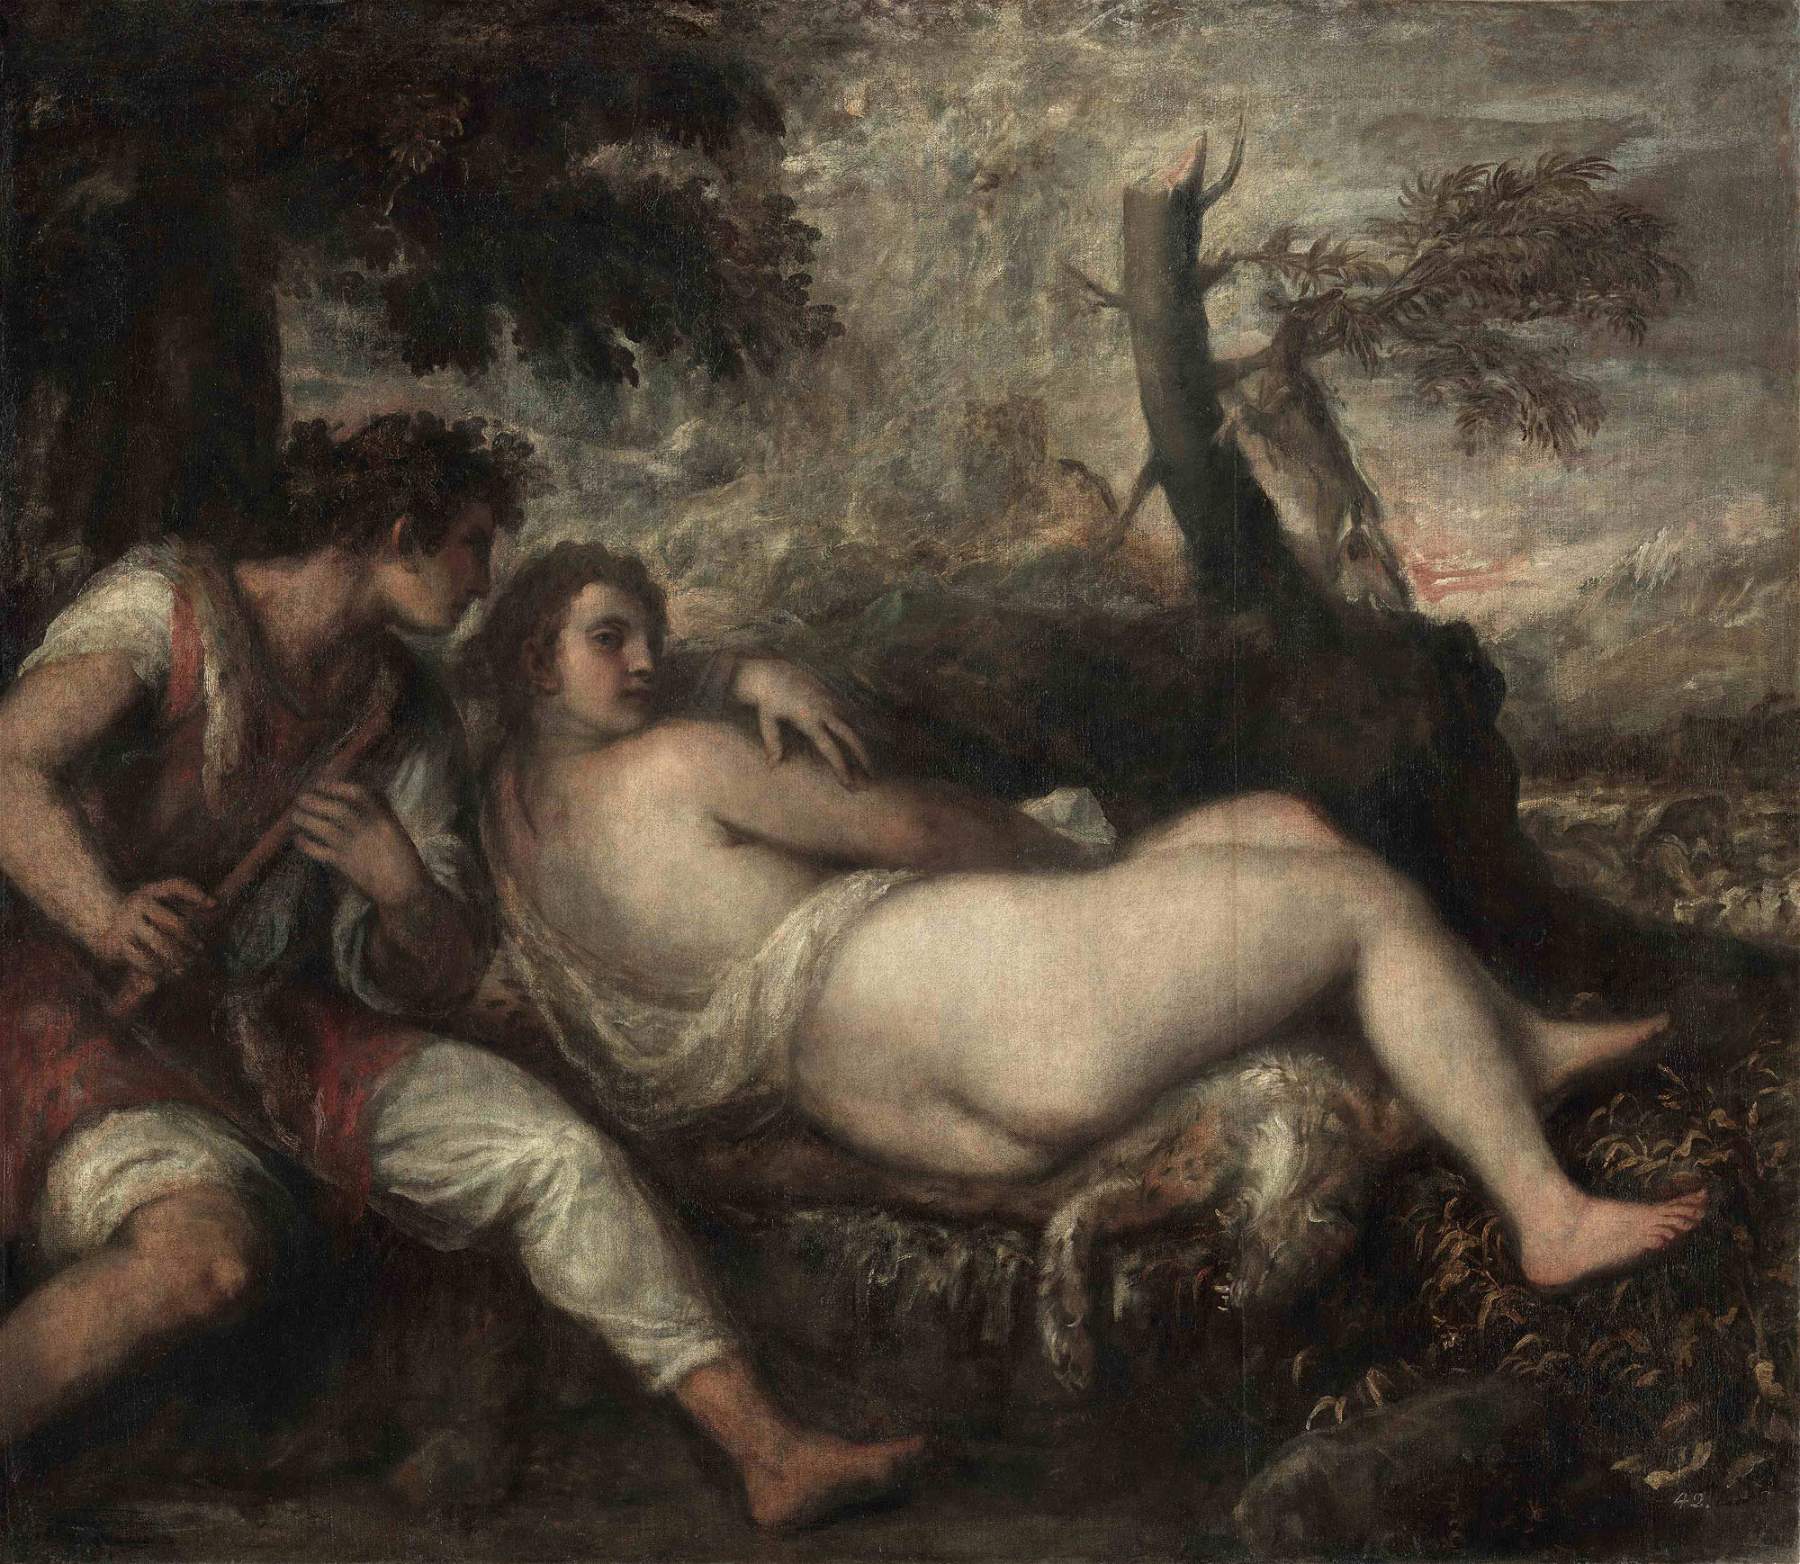 Rome, at the Borghese Gallery an exhibition-focus on Titian, nature and love